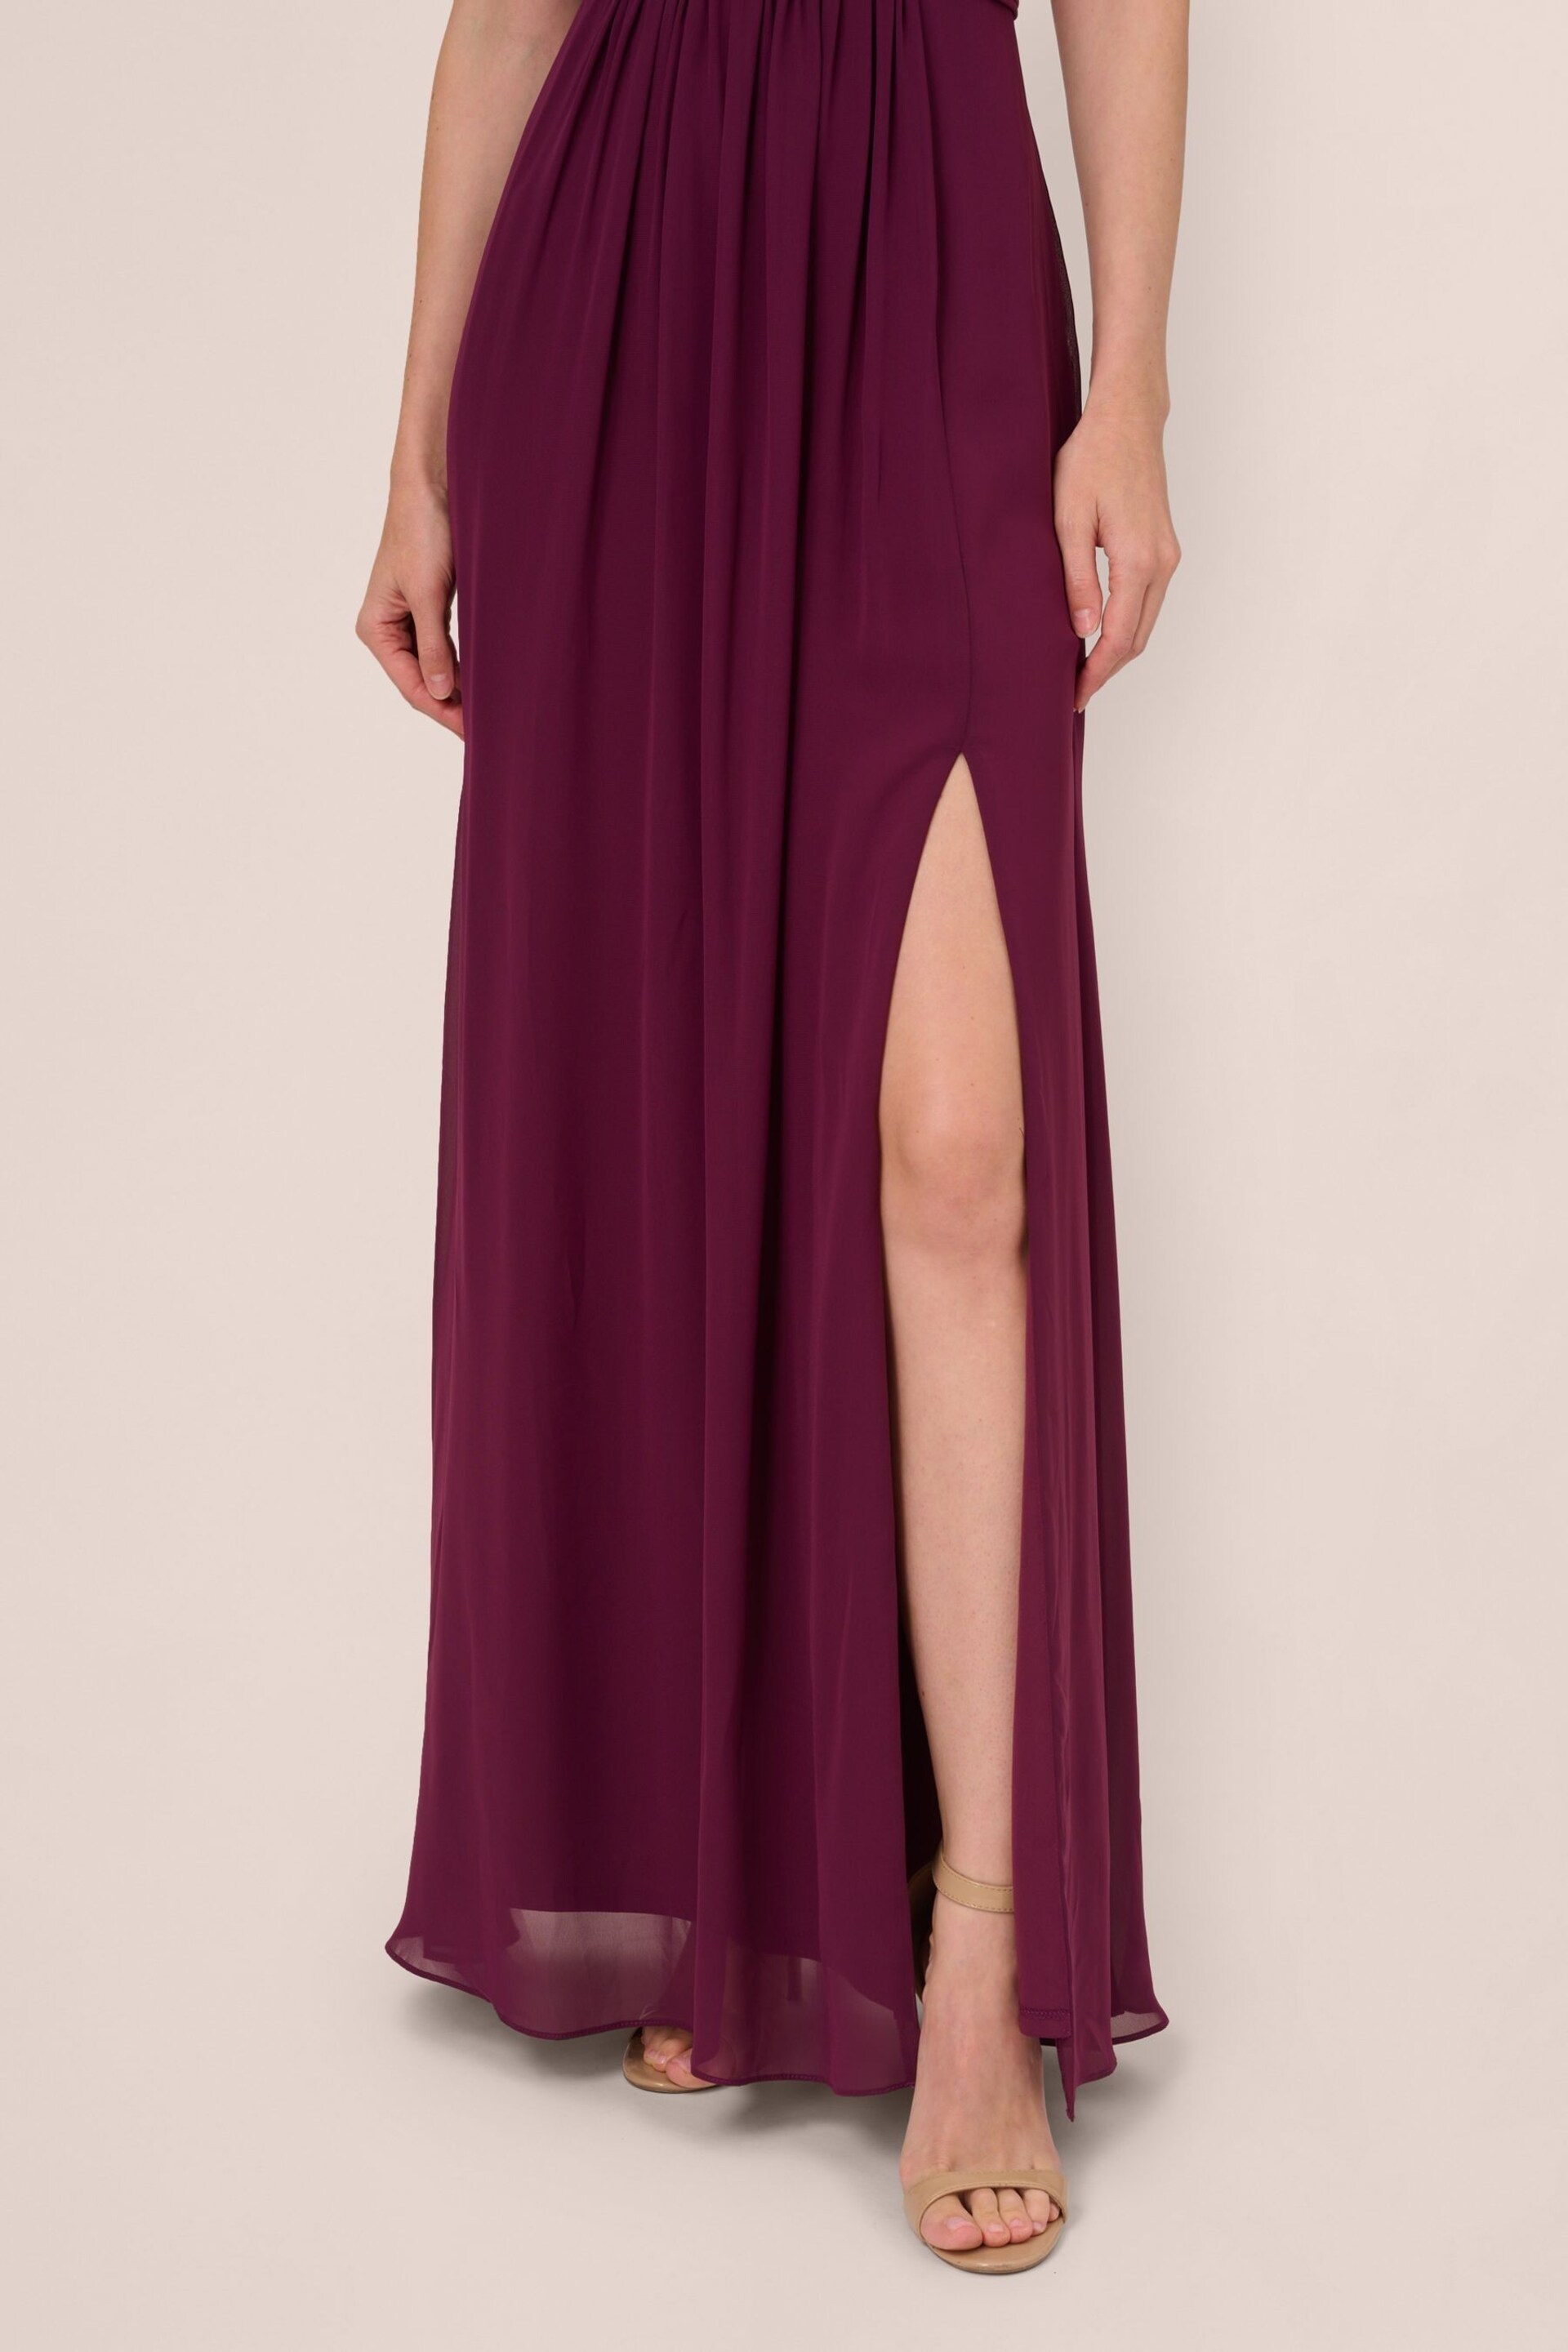 Adrianna Papell One Shoulder Chiffon Gown - Image 5 of 7